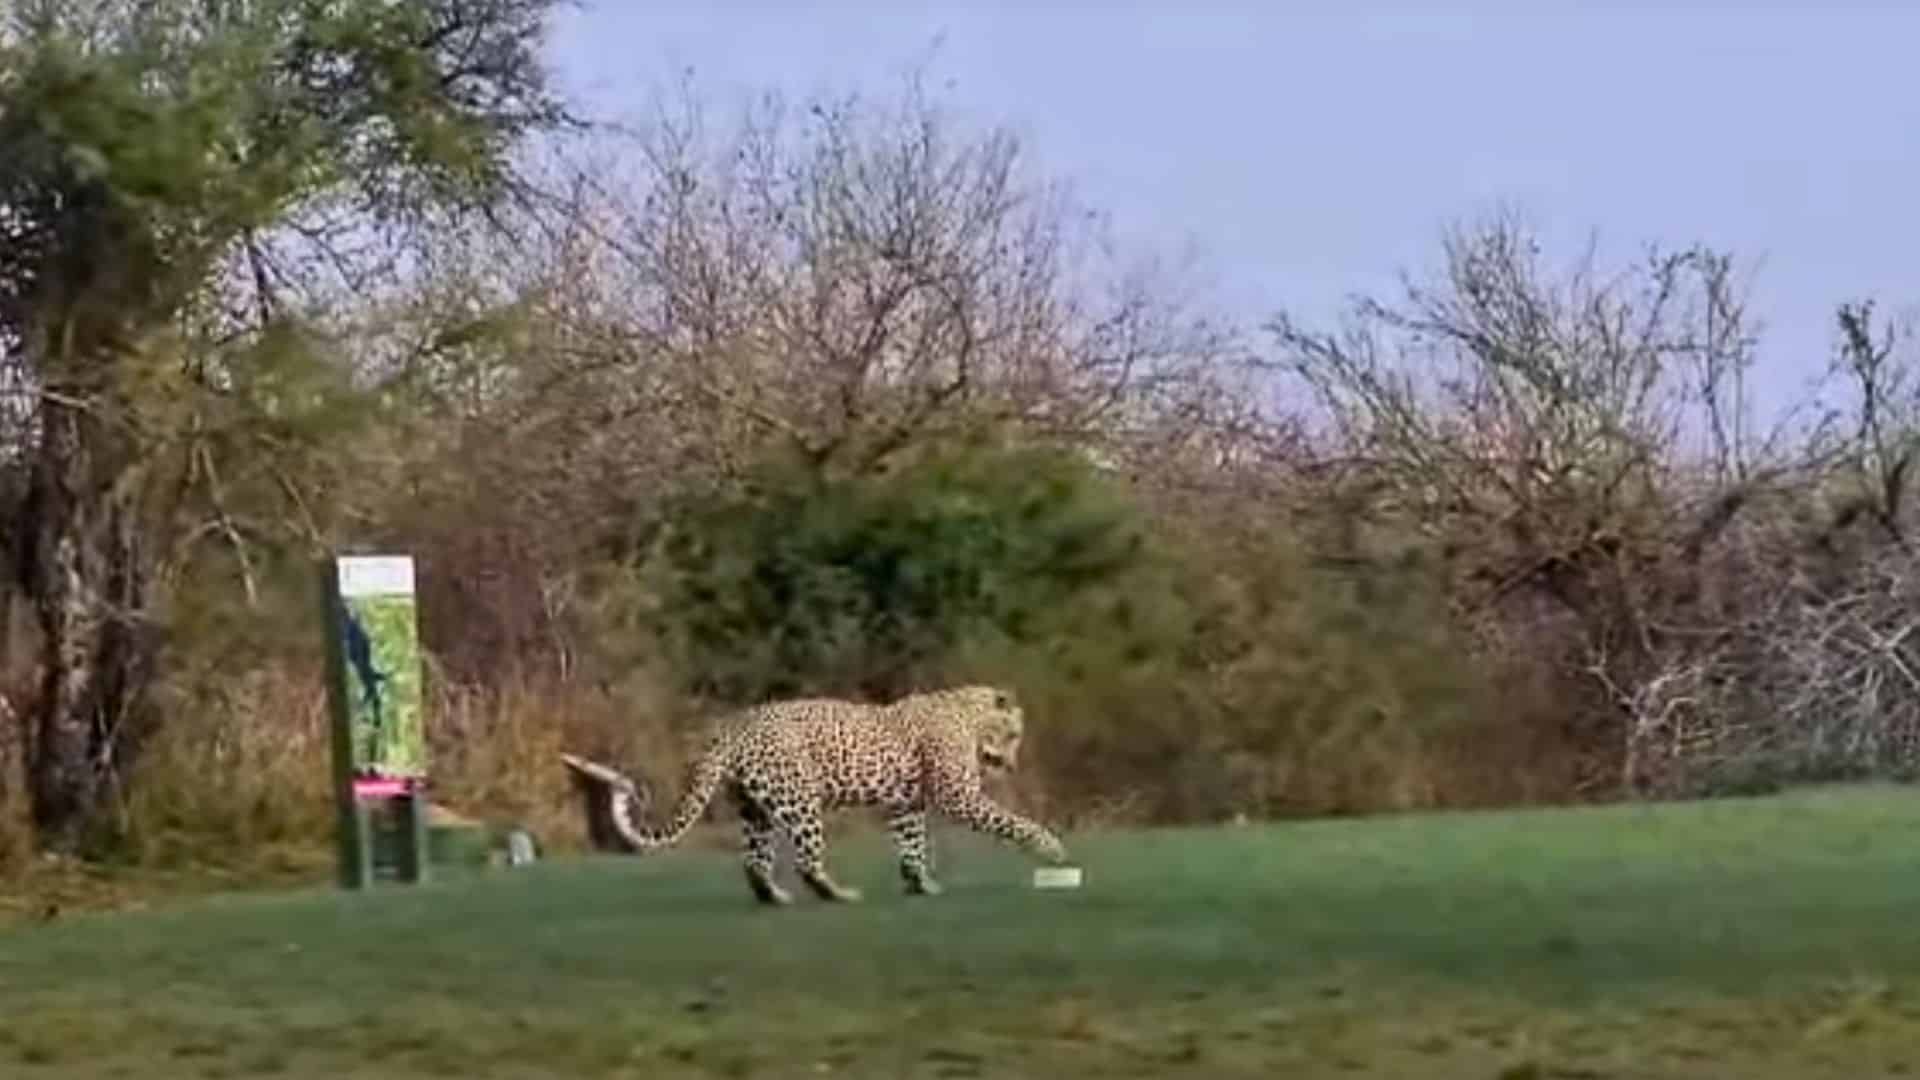 golf game interrupted by leopard